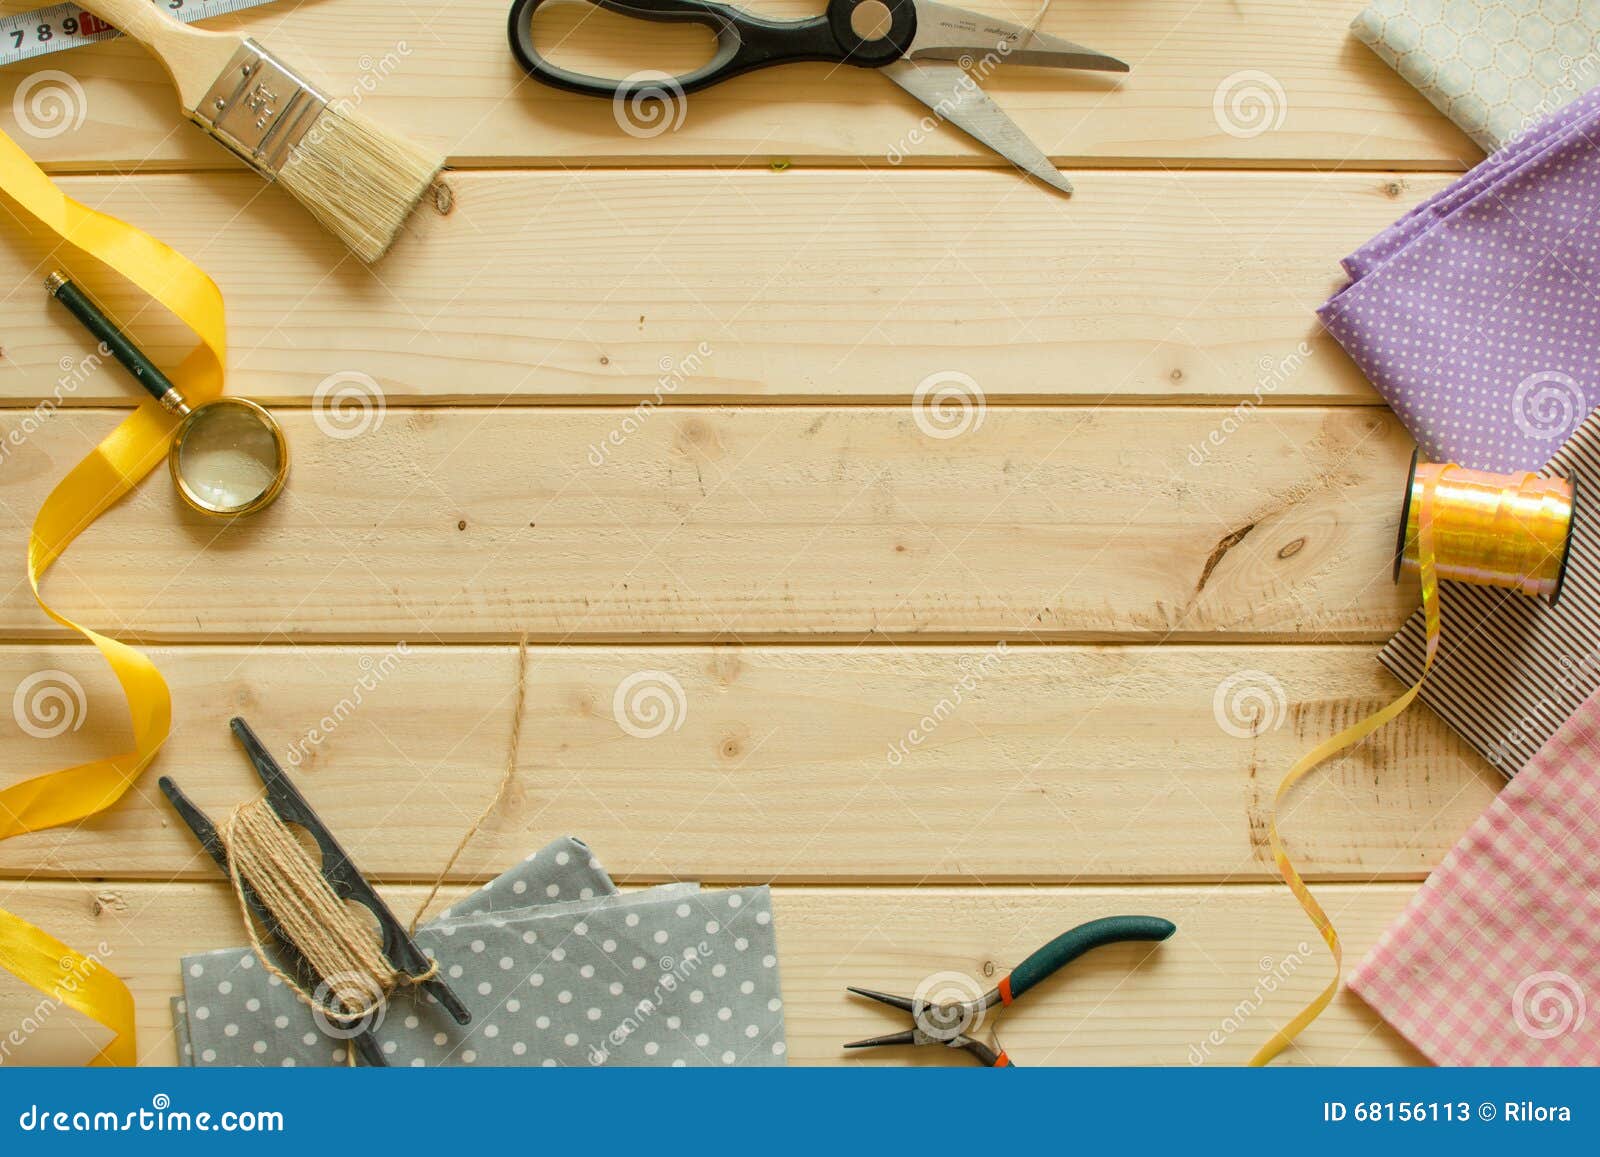 Multicolored Sewing Materials Stock Photo, Picture and Royalty Free Image.  Image 75203400.